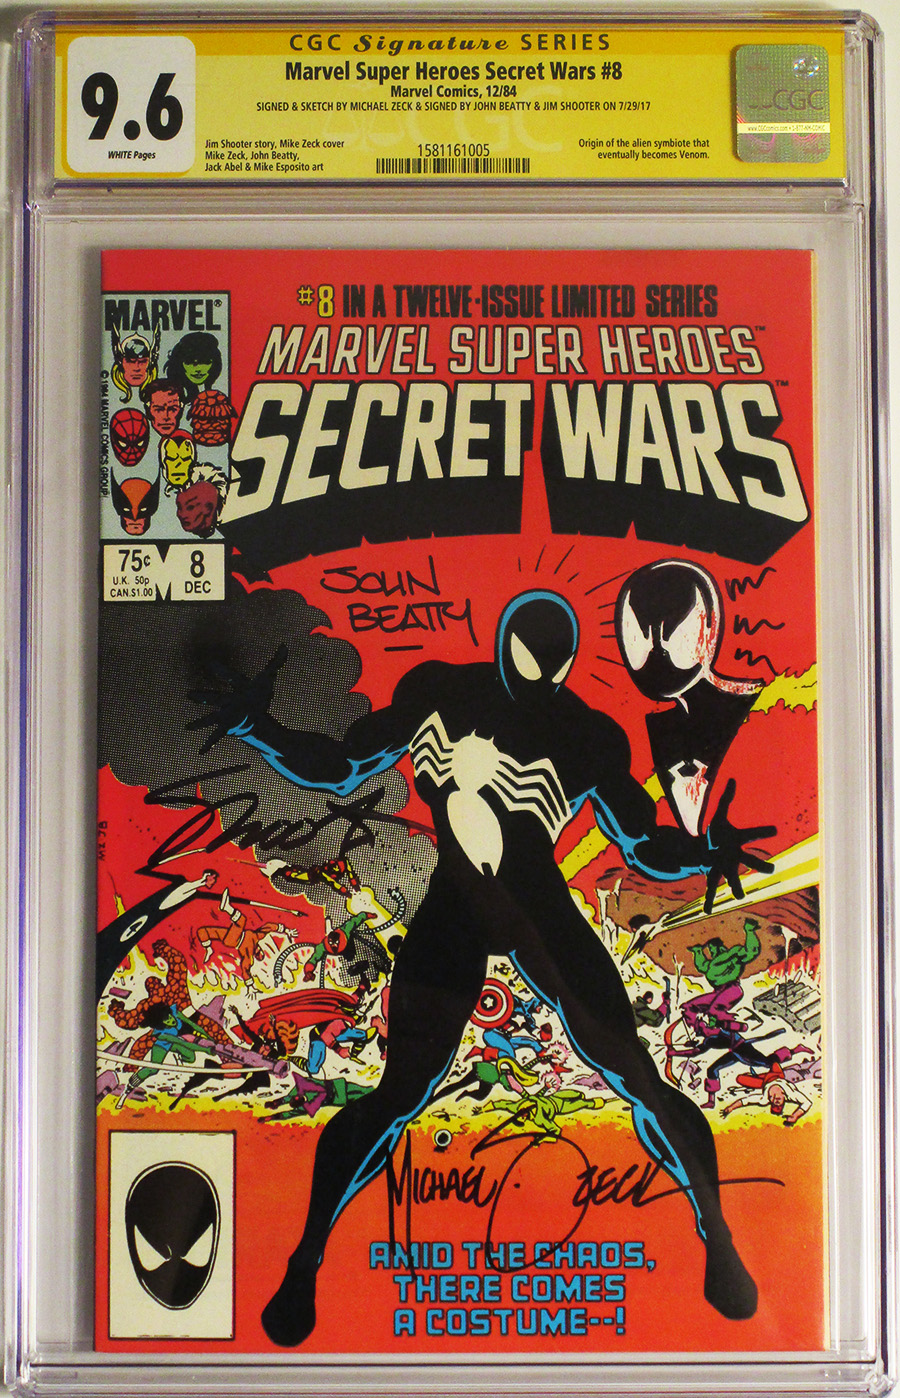 Marvel Super-Heroes Secret Wars #8 Cover F CGC Signature Series 9.6 Signed by Michael Zeck John Beatty and Jim Shooter